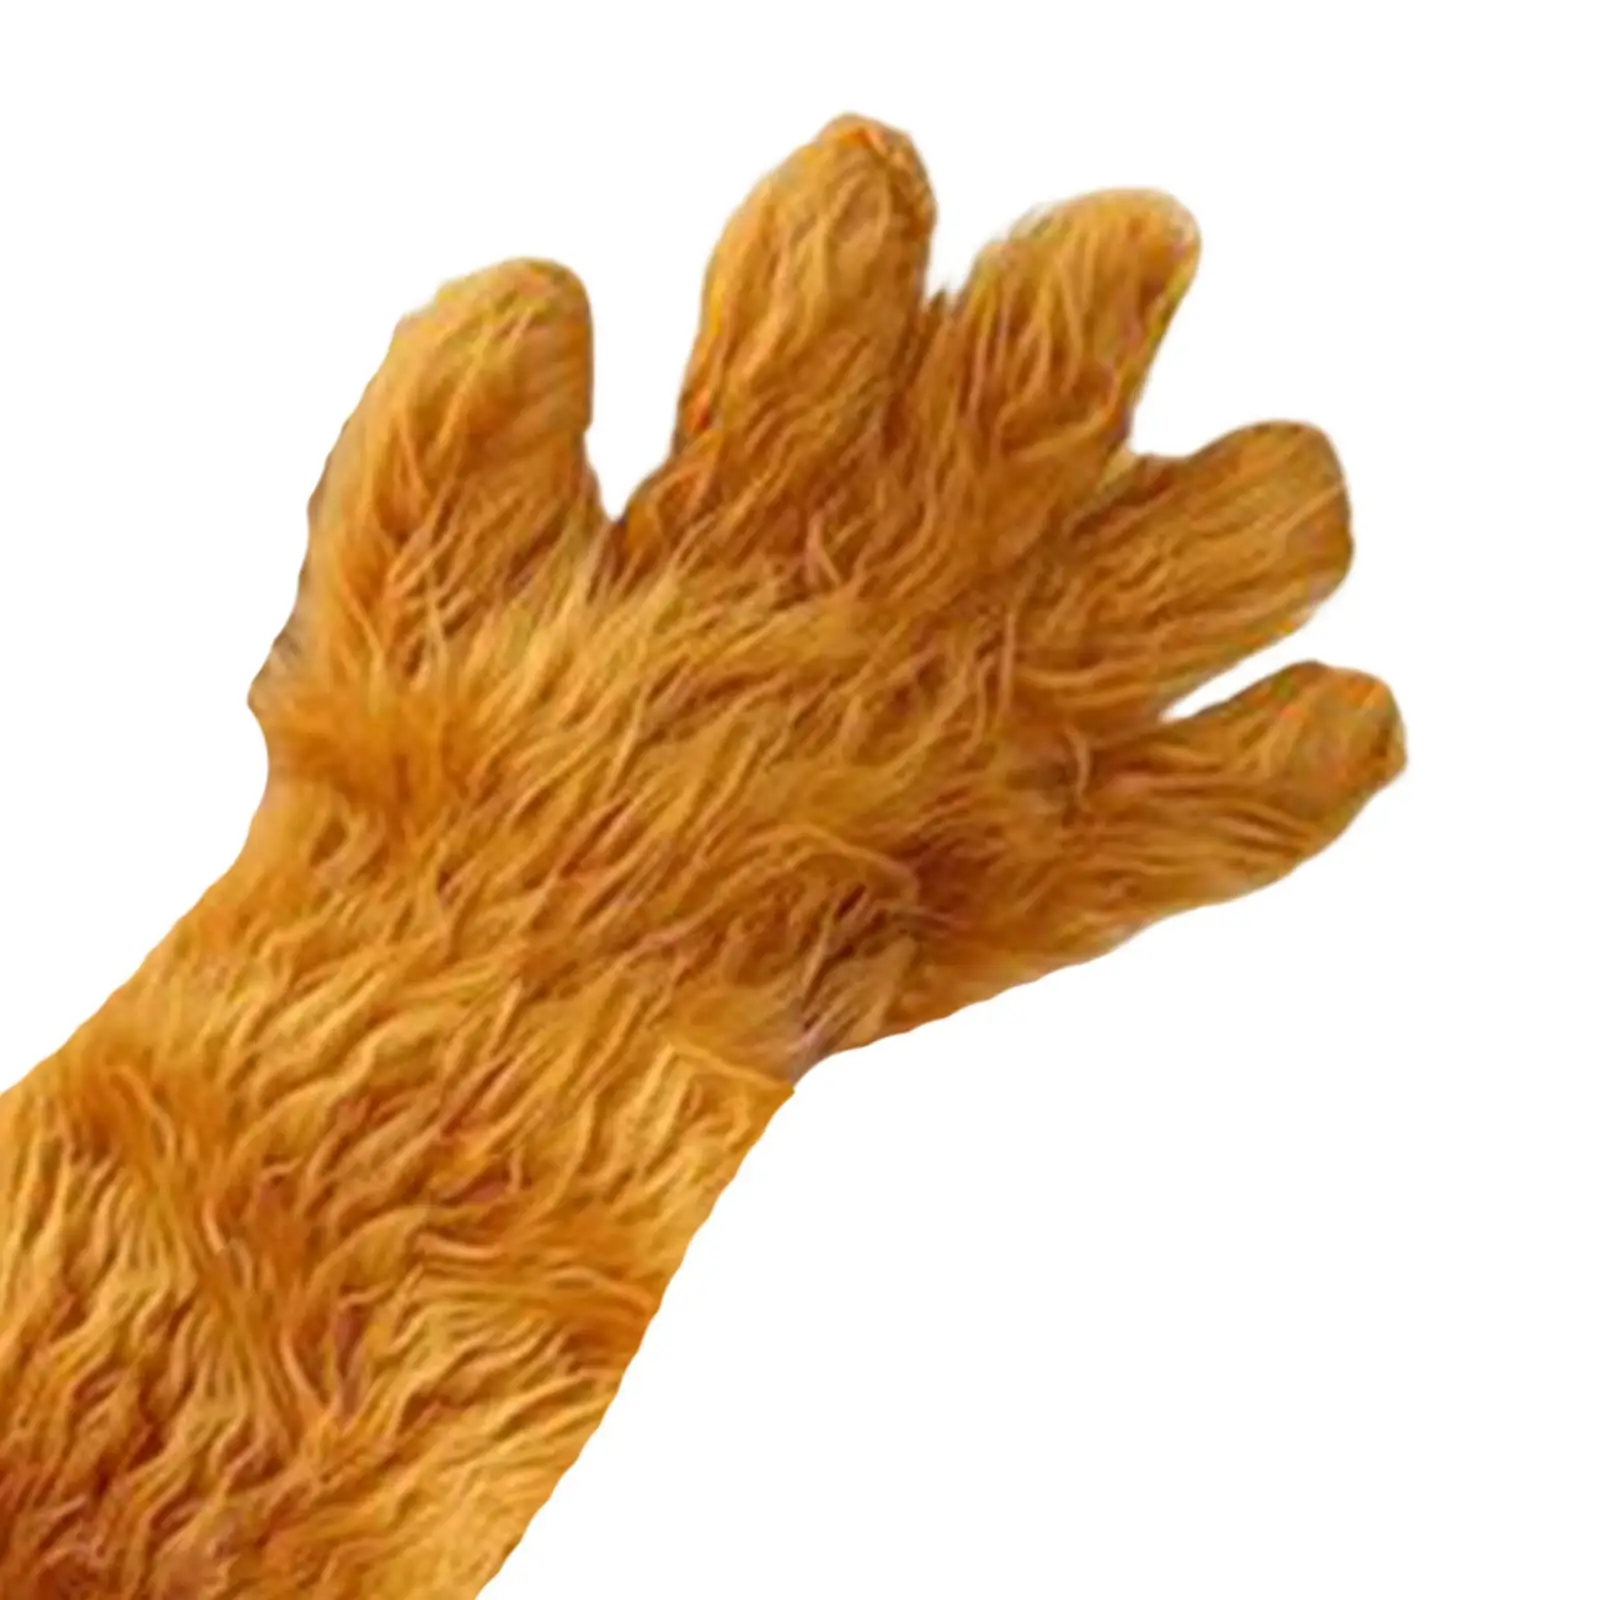 Paw Gloves Costume Dress Adult for Halloween Party Festival Role Play Carnival